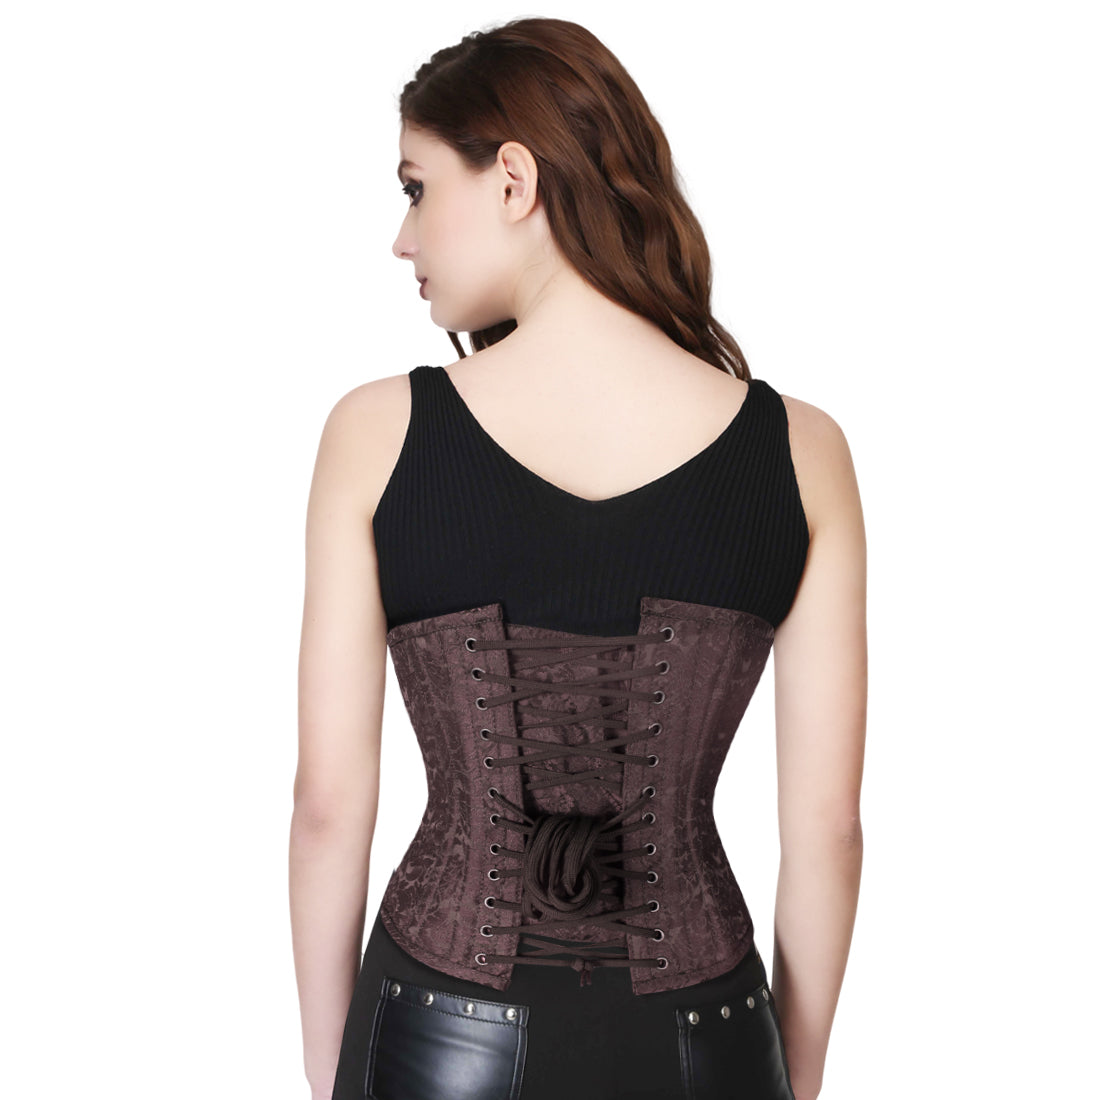 The EMBALISHED UNDERBUST WAISTREDUCING STEAMPUNK BROWN CORSET